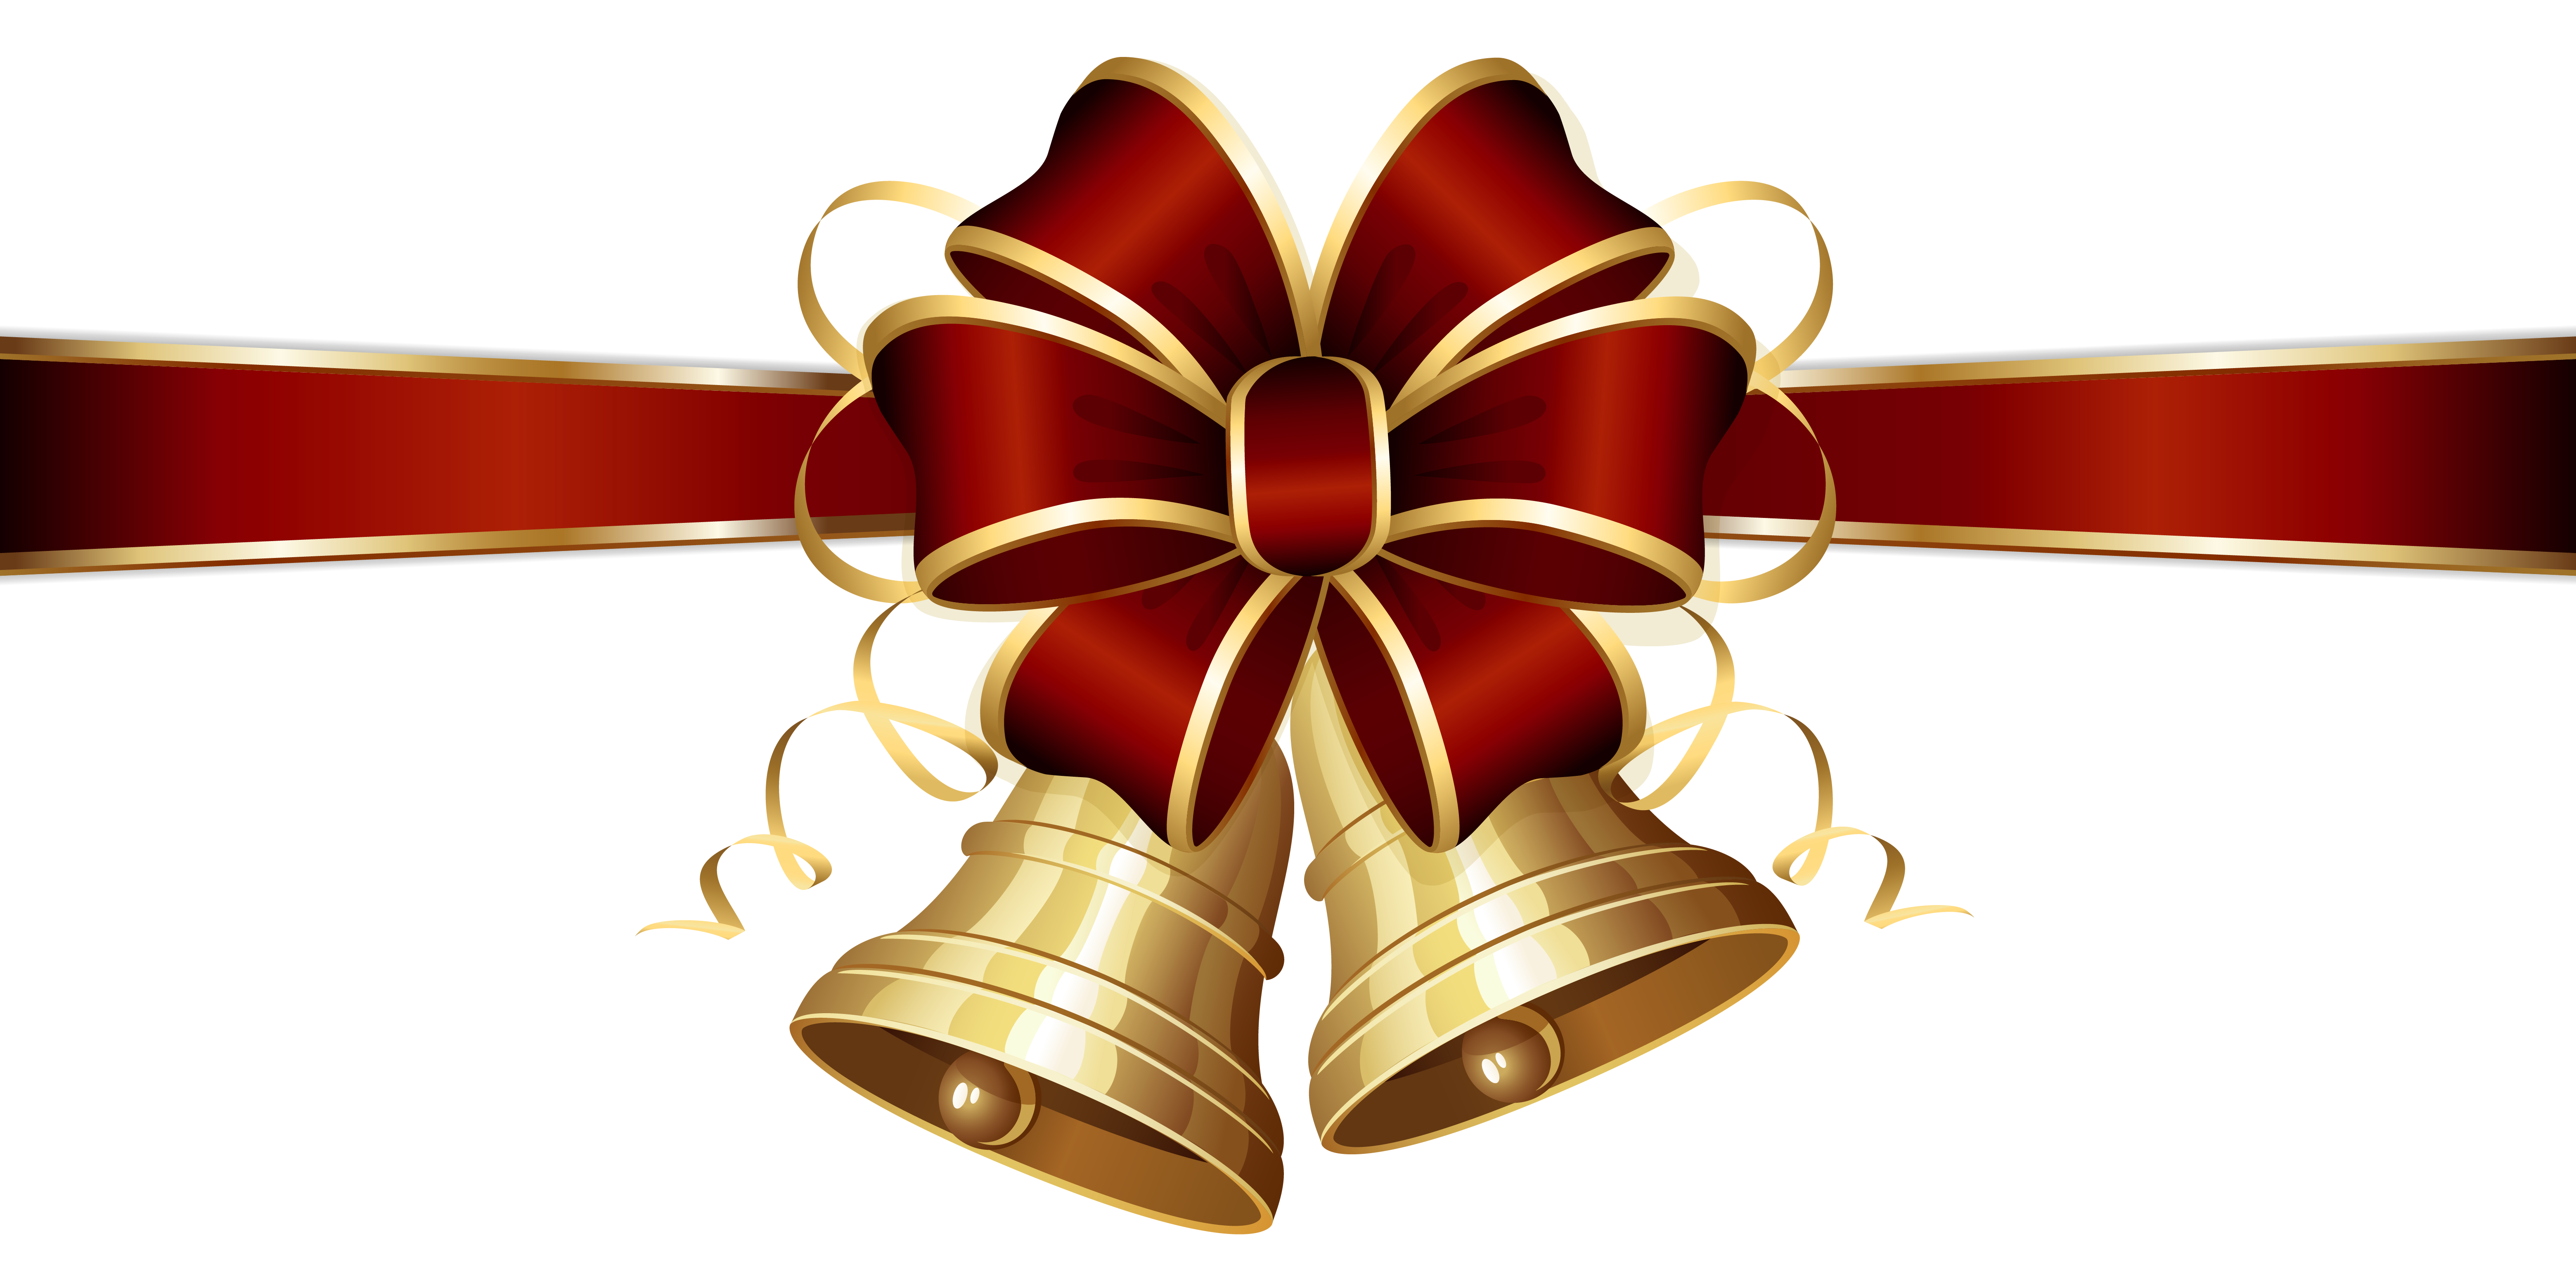 Christmas Bells and Red Bow PNG Clipart Image | Gallery ...